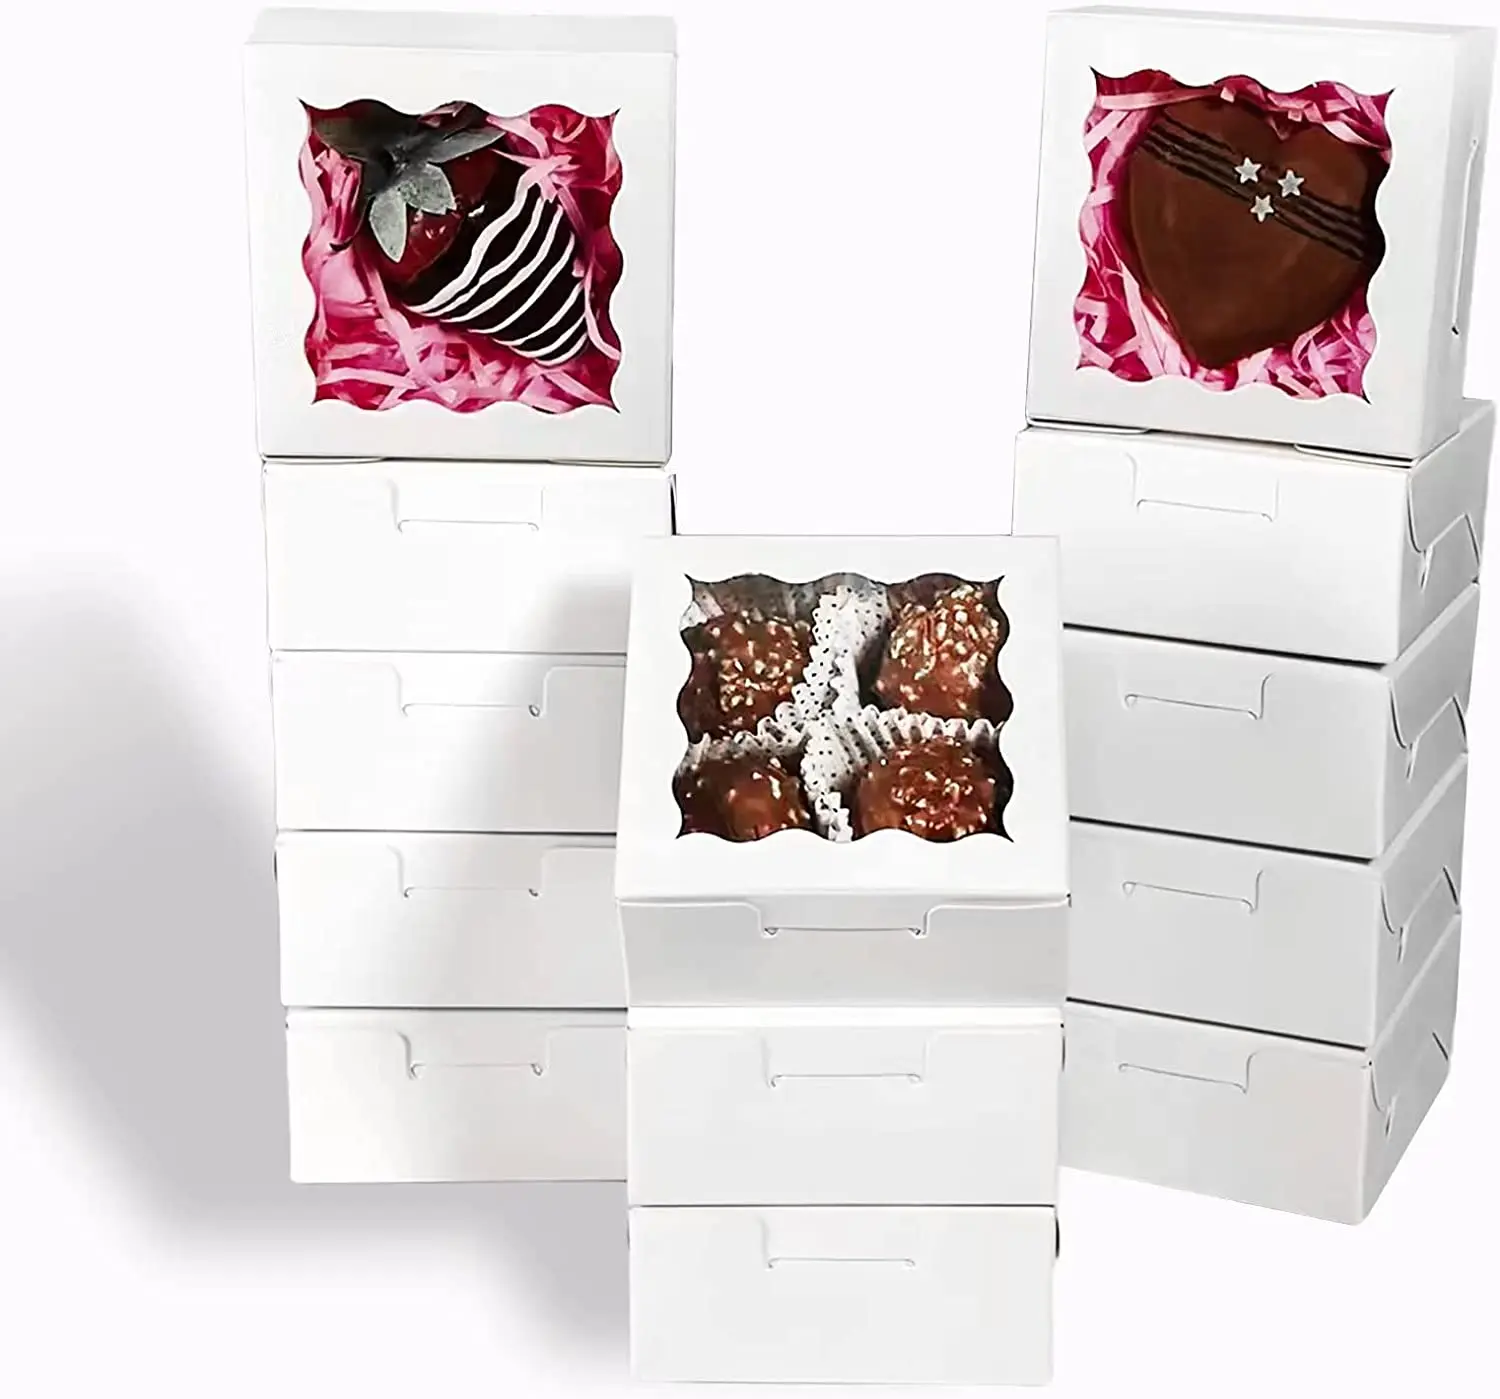 

Cookies Boxes Soap Boxes Chocolate Truffle Boxes for 4, Donut Boxes Macaron Boxes Mini Bakery Boxes with Window Brownie Boxes